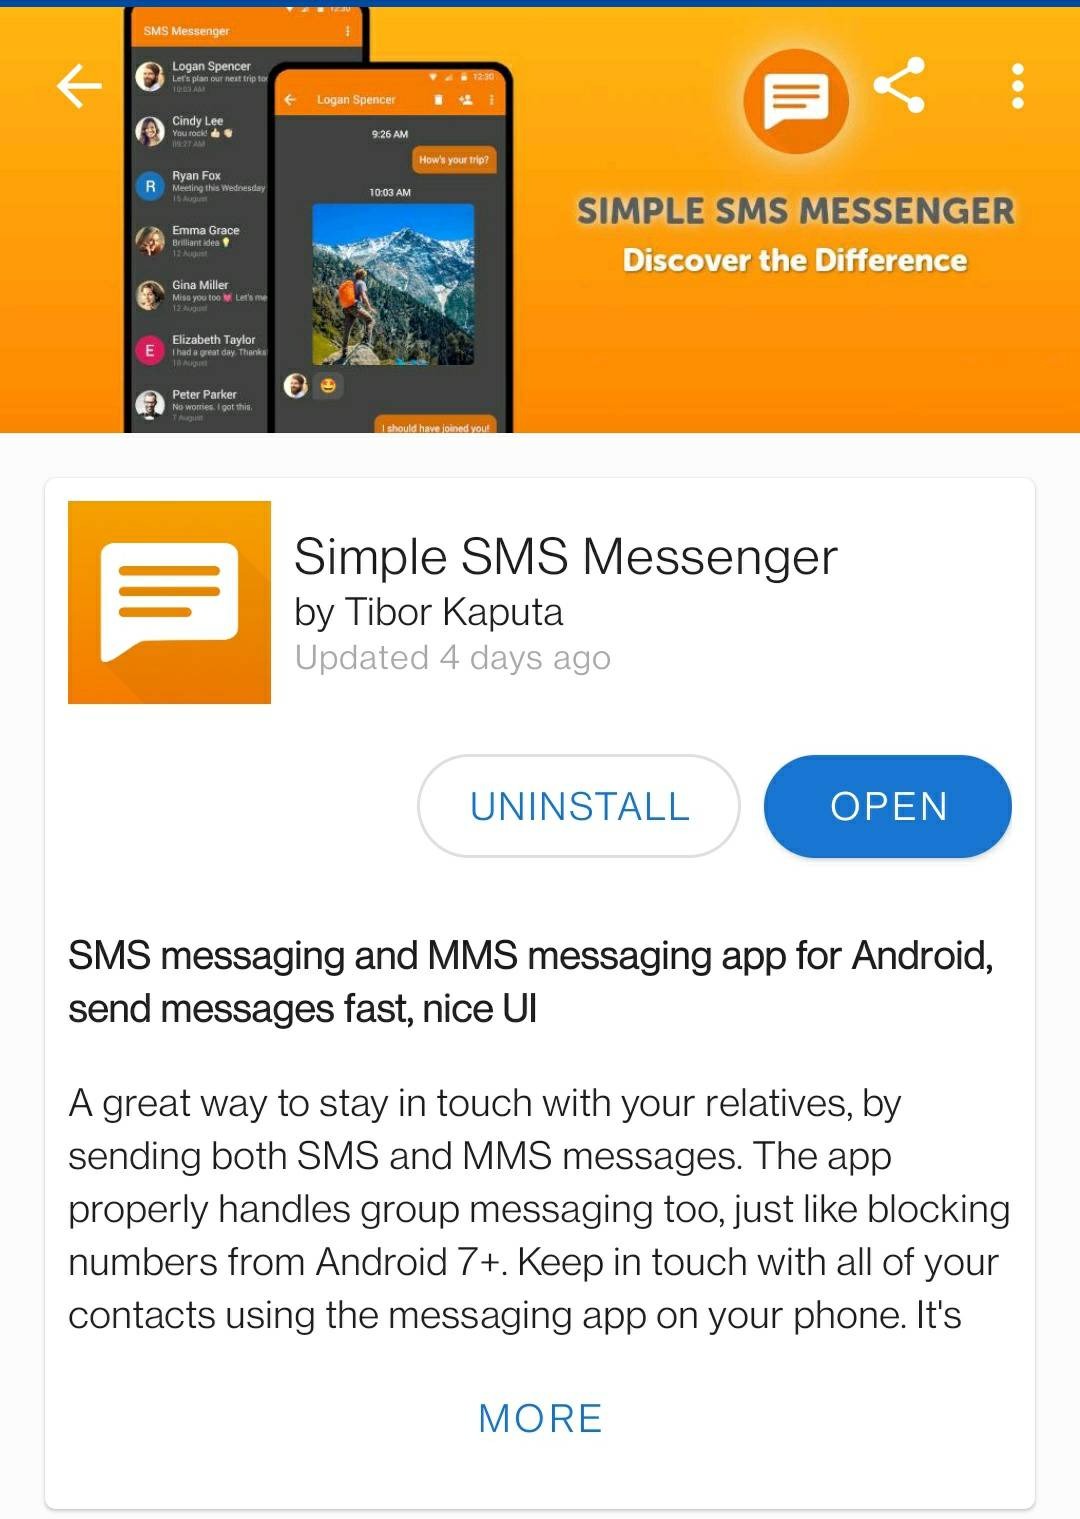 f-droid sms messenger